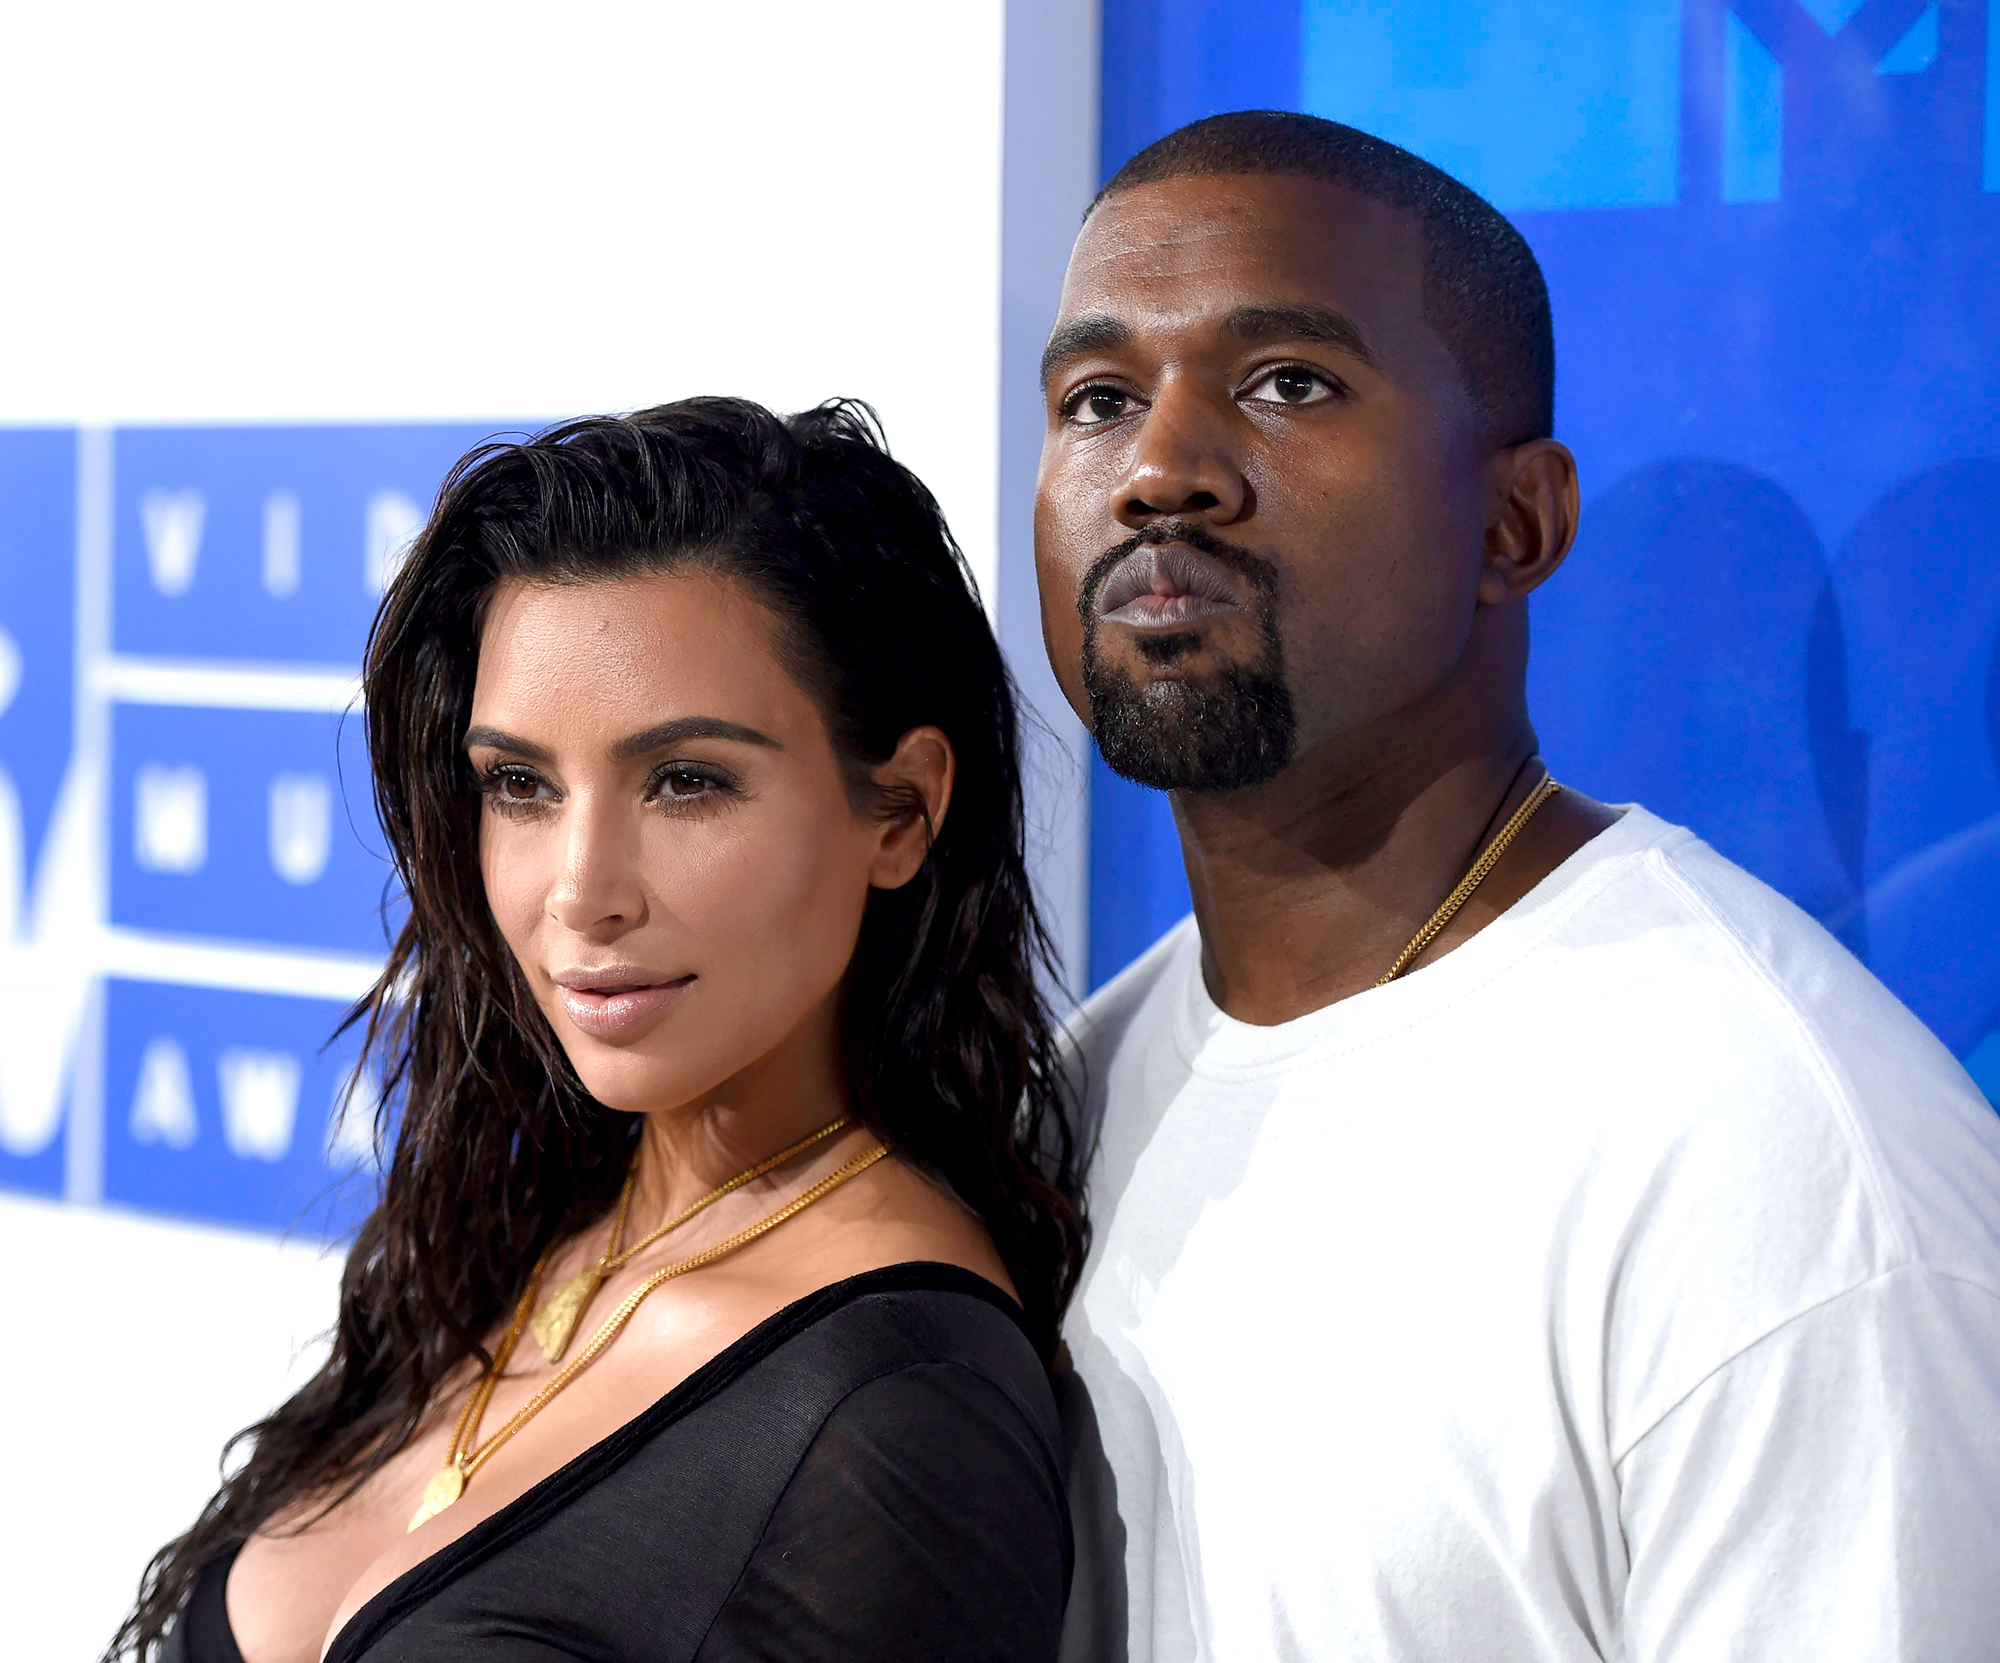 Kanye West Banned From Instagram After Racially Abusing Trevor Noah